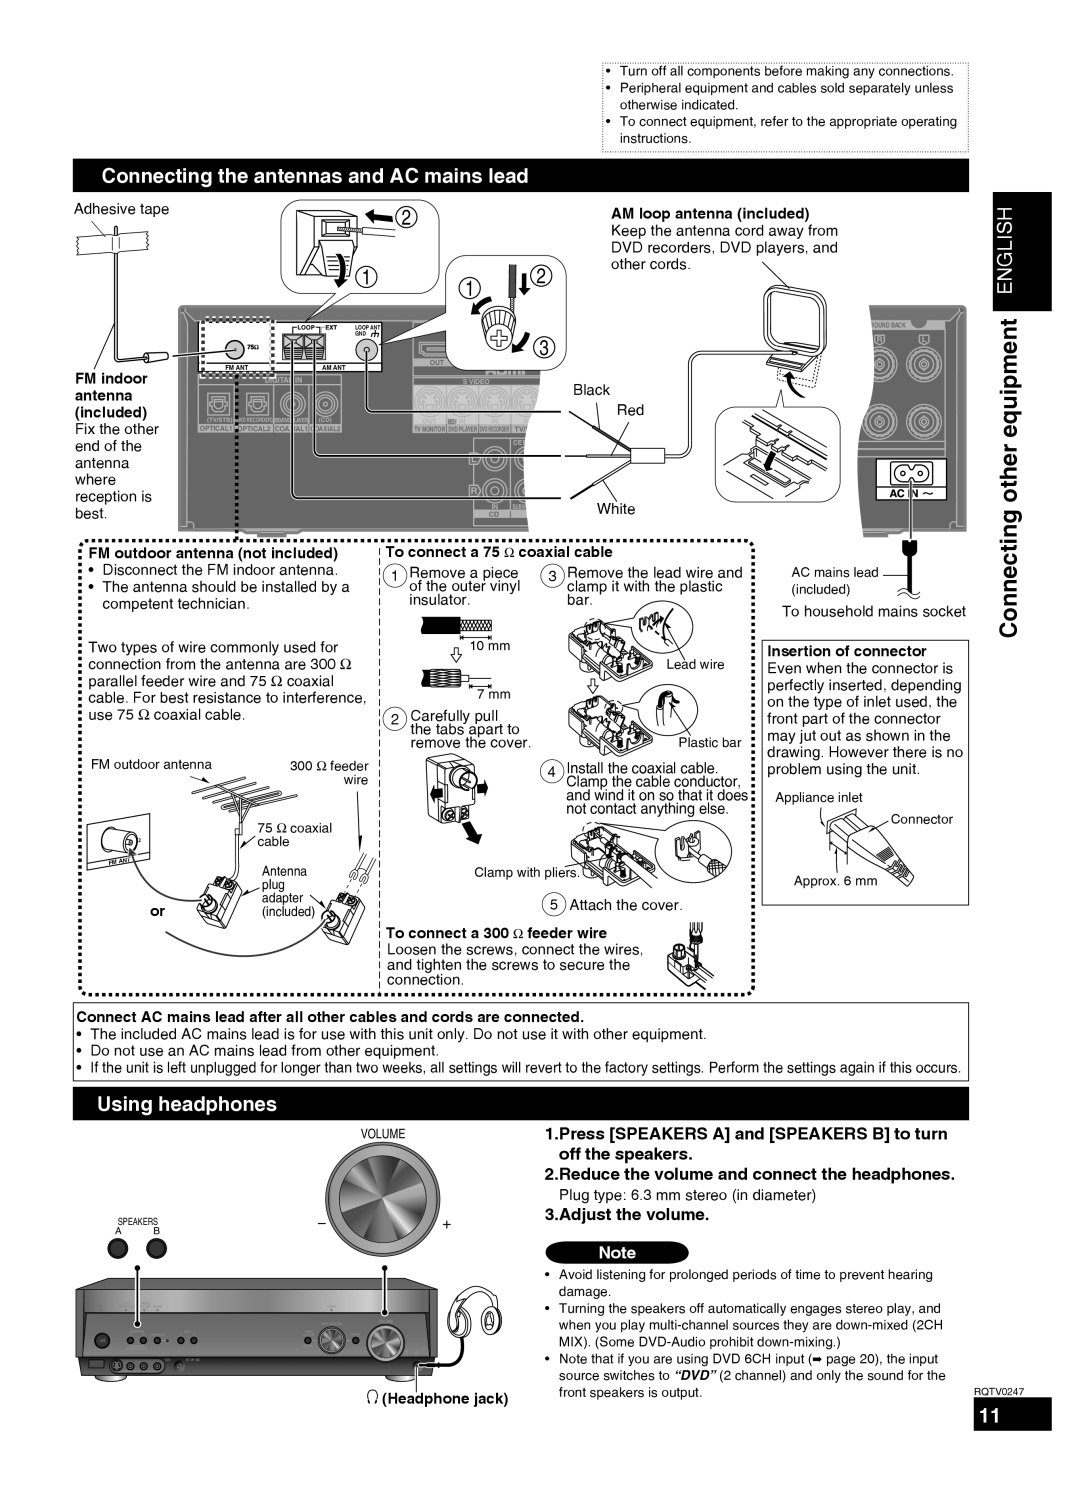 Panasonic SA-XR59 manual other equipment ENGLISH, Connecting the antennas and AC mains lead, Using headphones, other cords 